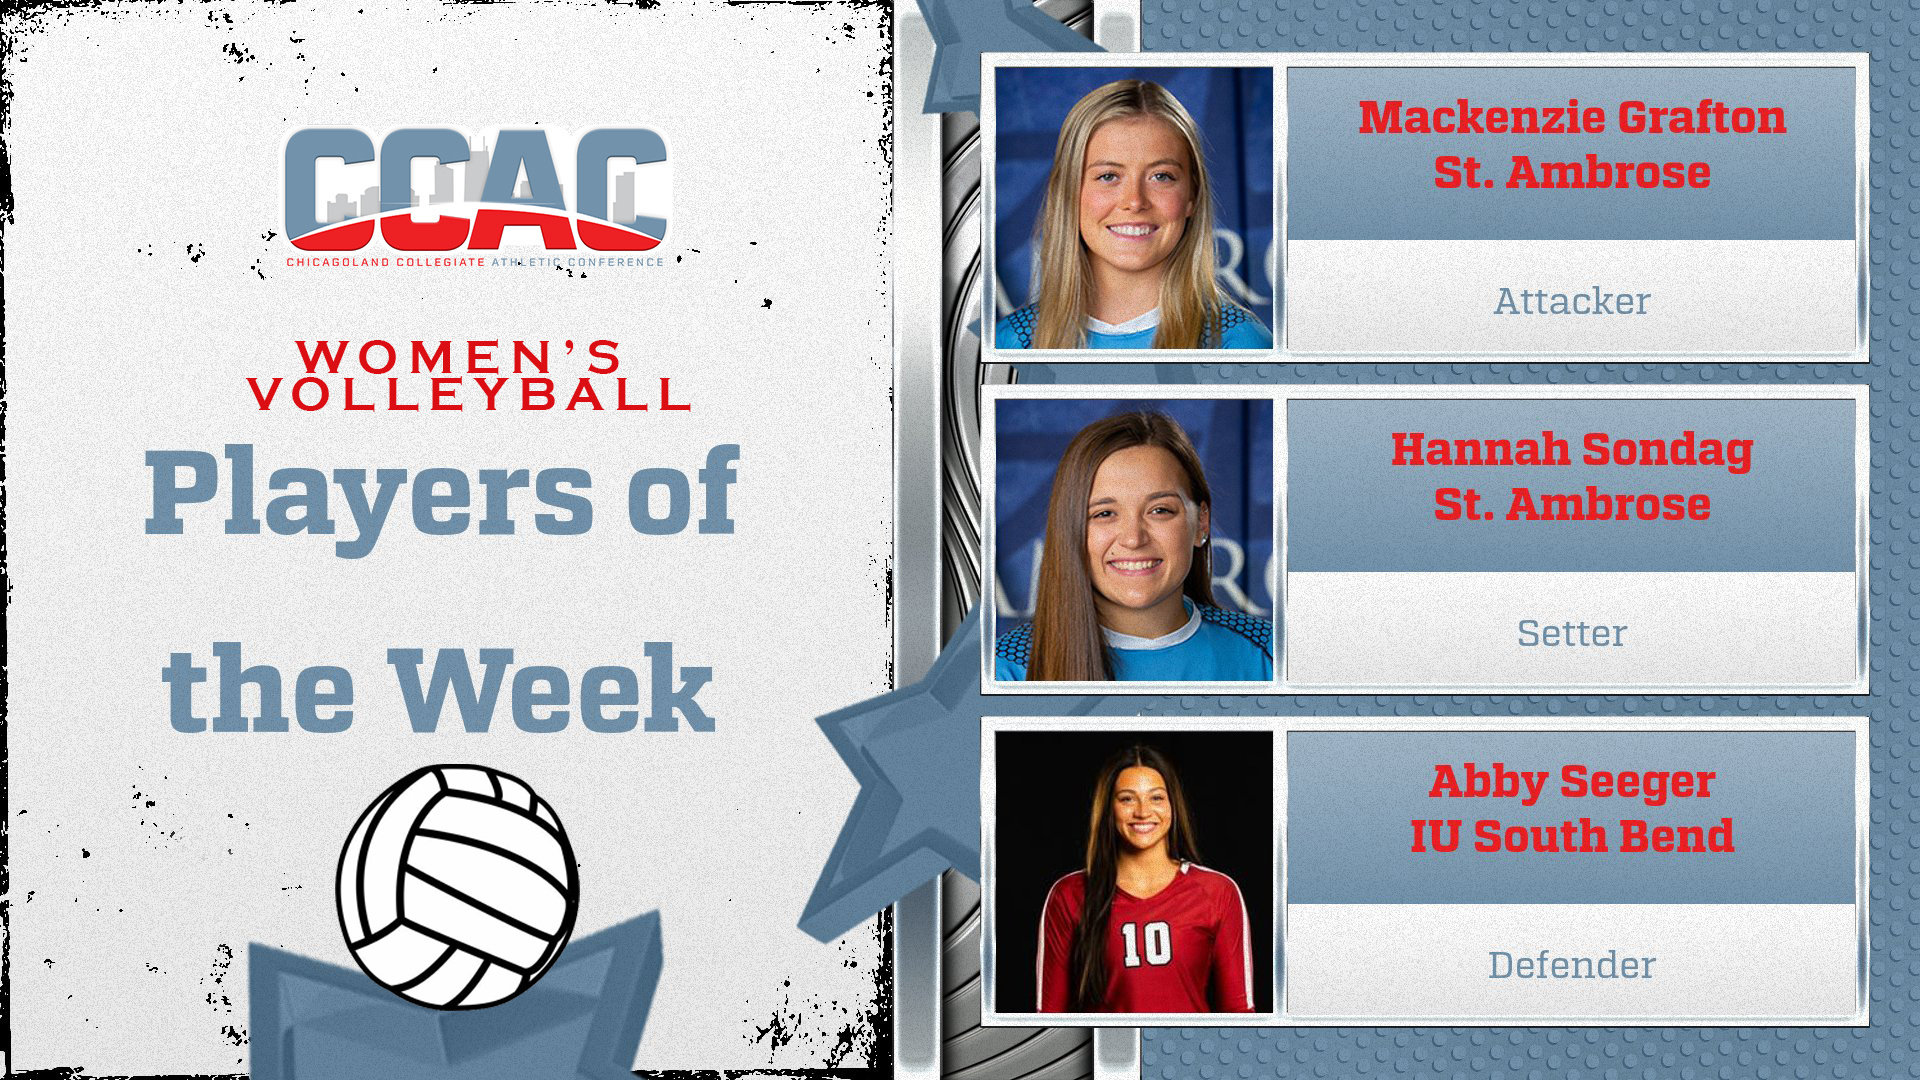 SAU's Grafton, Sondag Back In The News, IUSB's Seeger Gains First WVB Weekly Honor